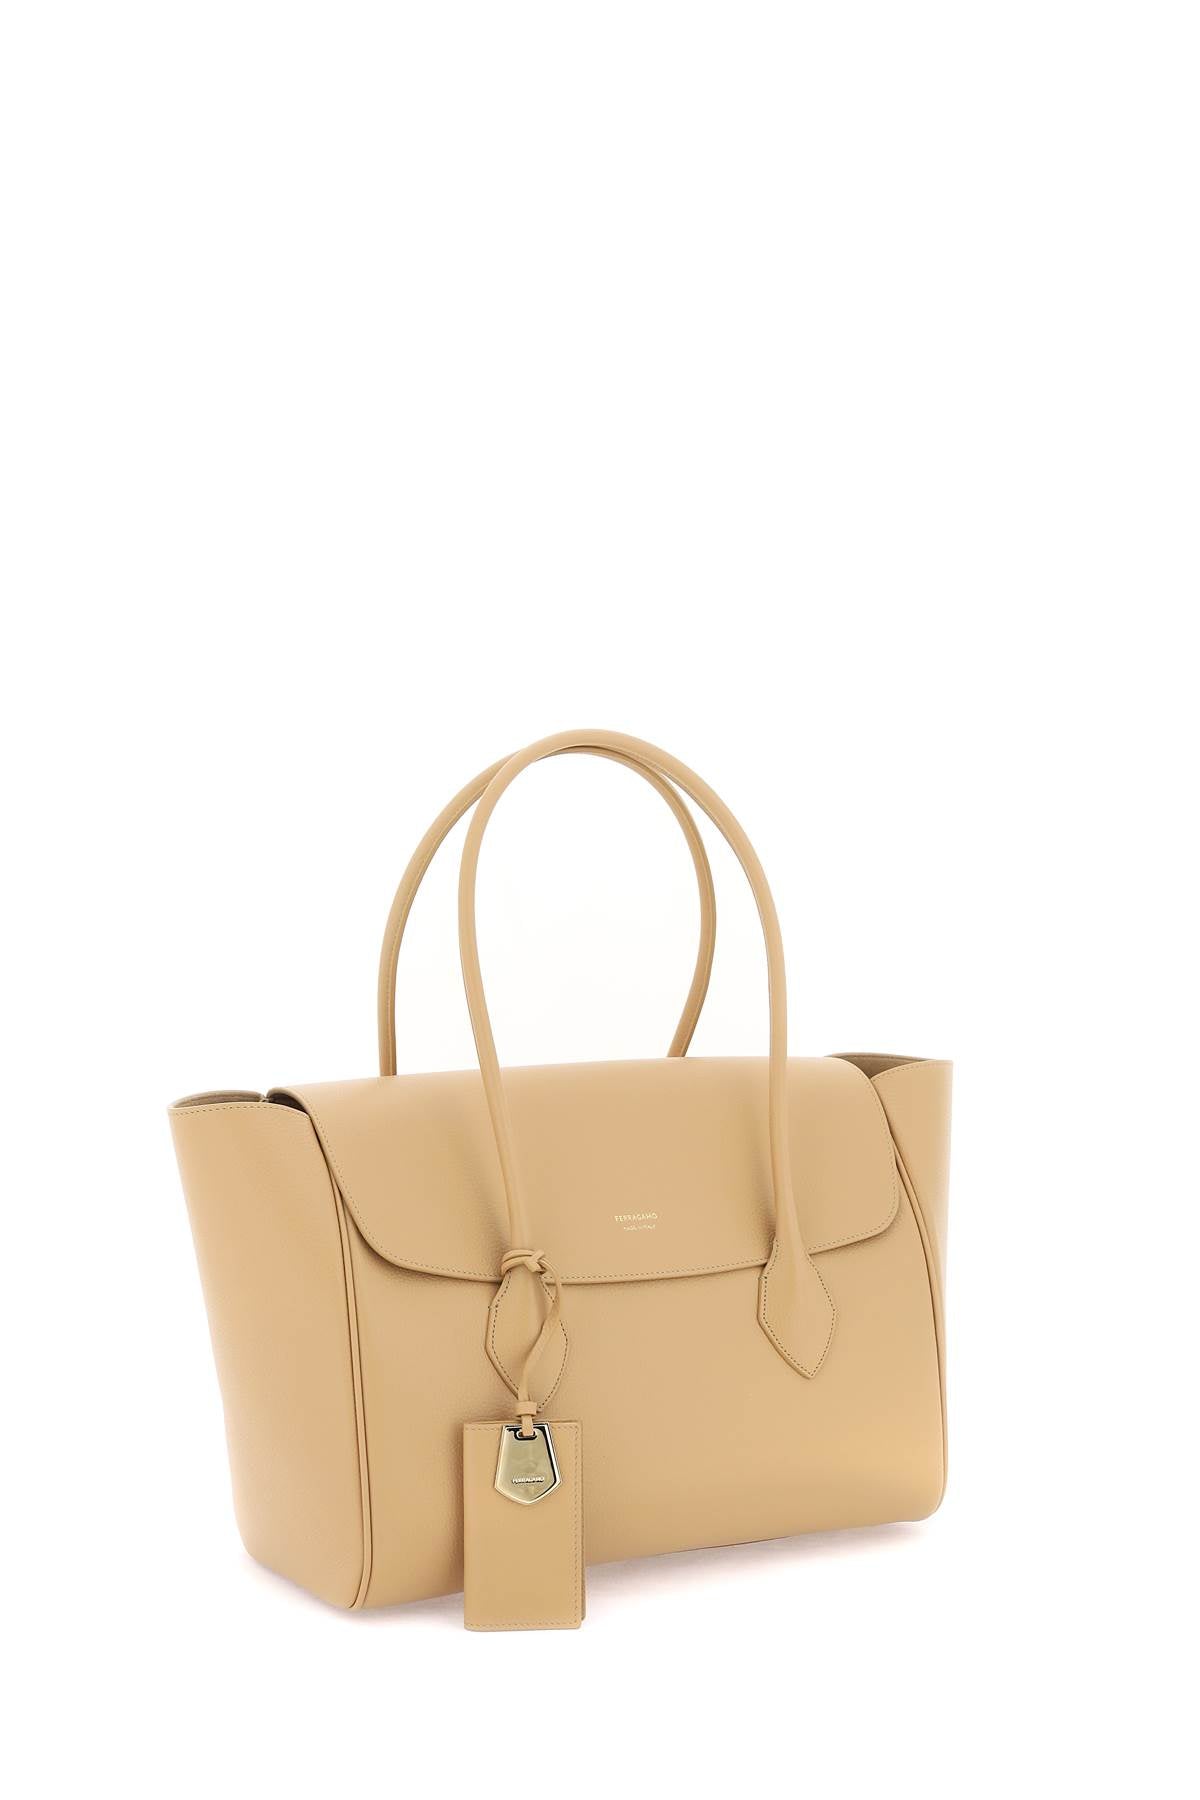 FERRAGAMO Salvatore Large Tan Grained Leather Tote with Gold Logo and Suede Interior